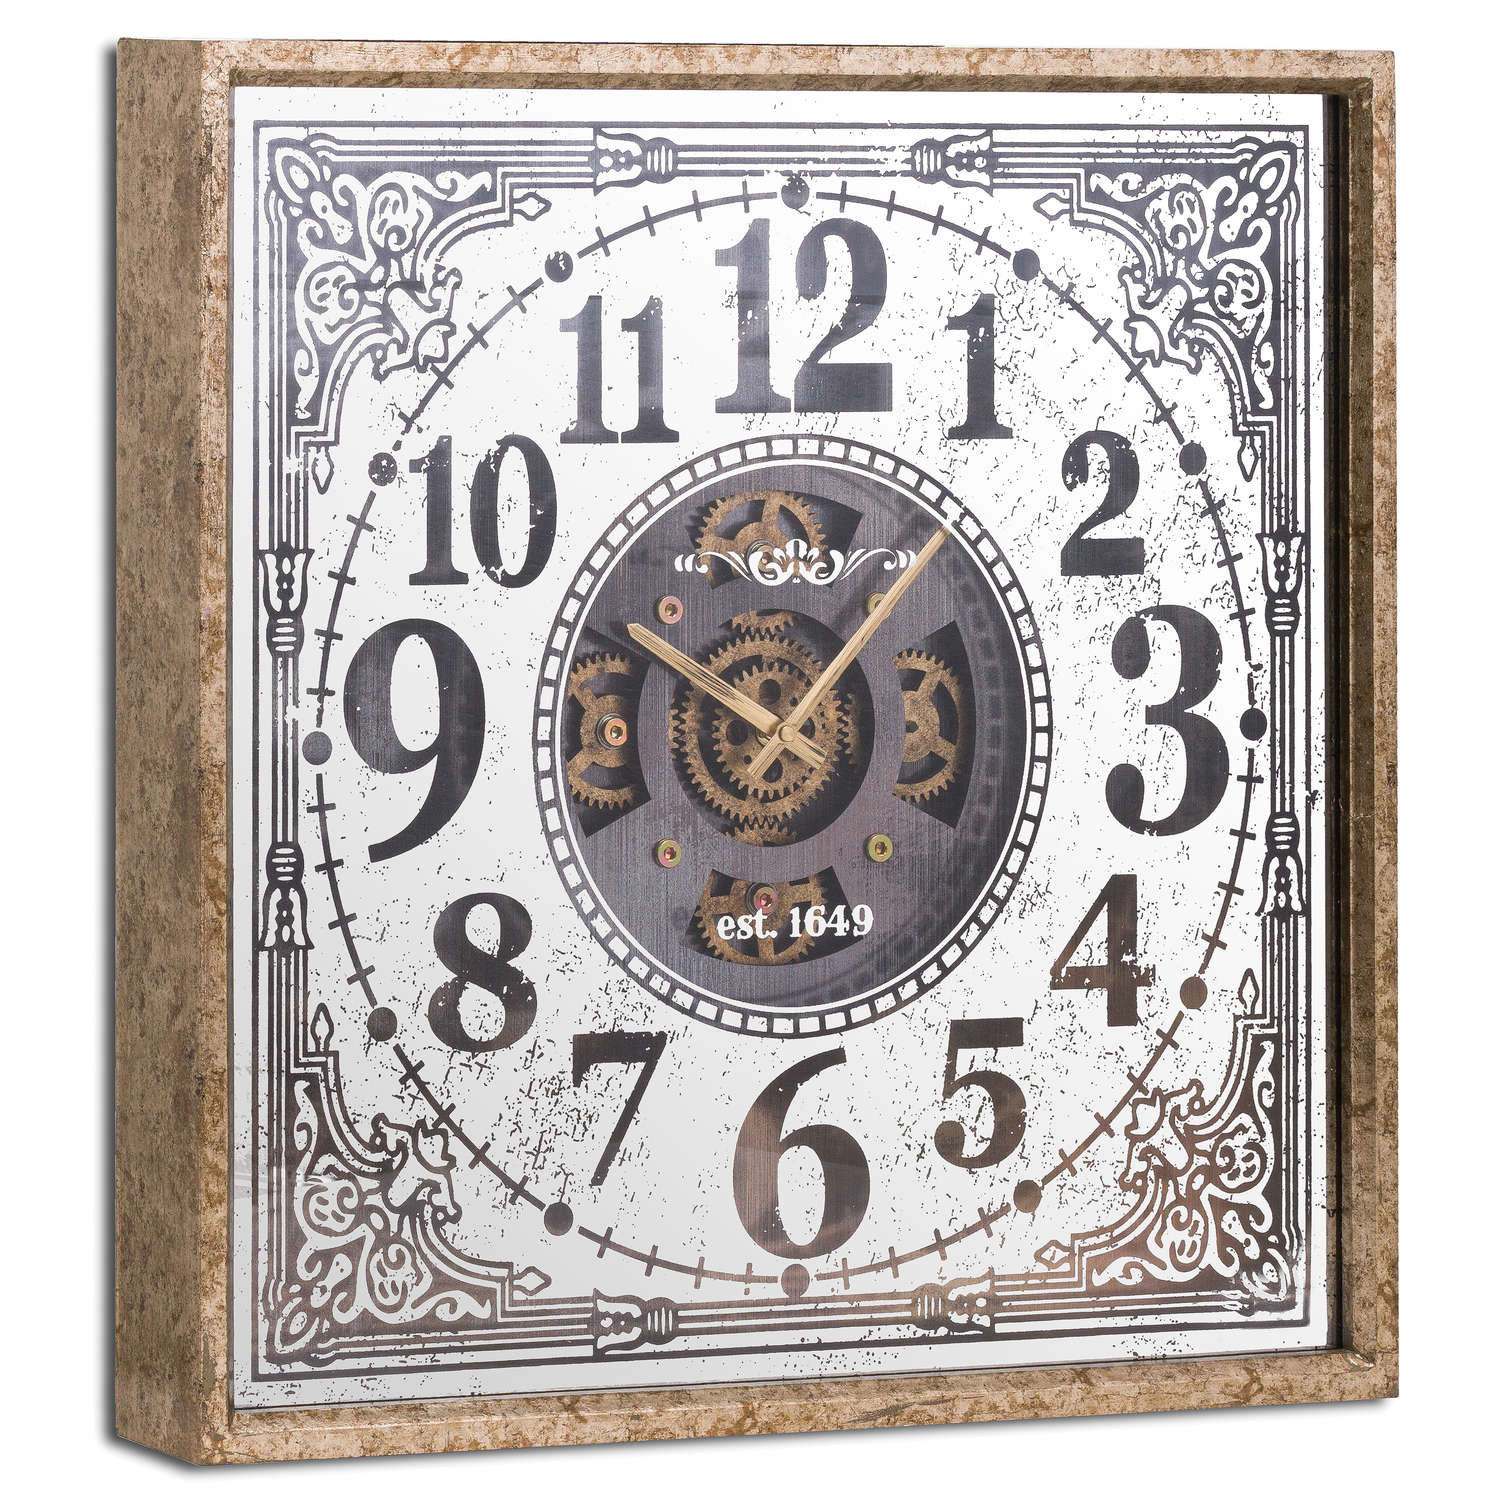 Mirrored Moving Mechanism Wall Clock - Image 1